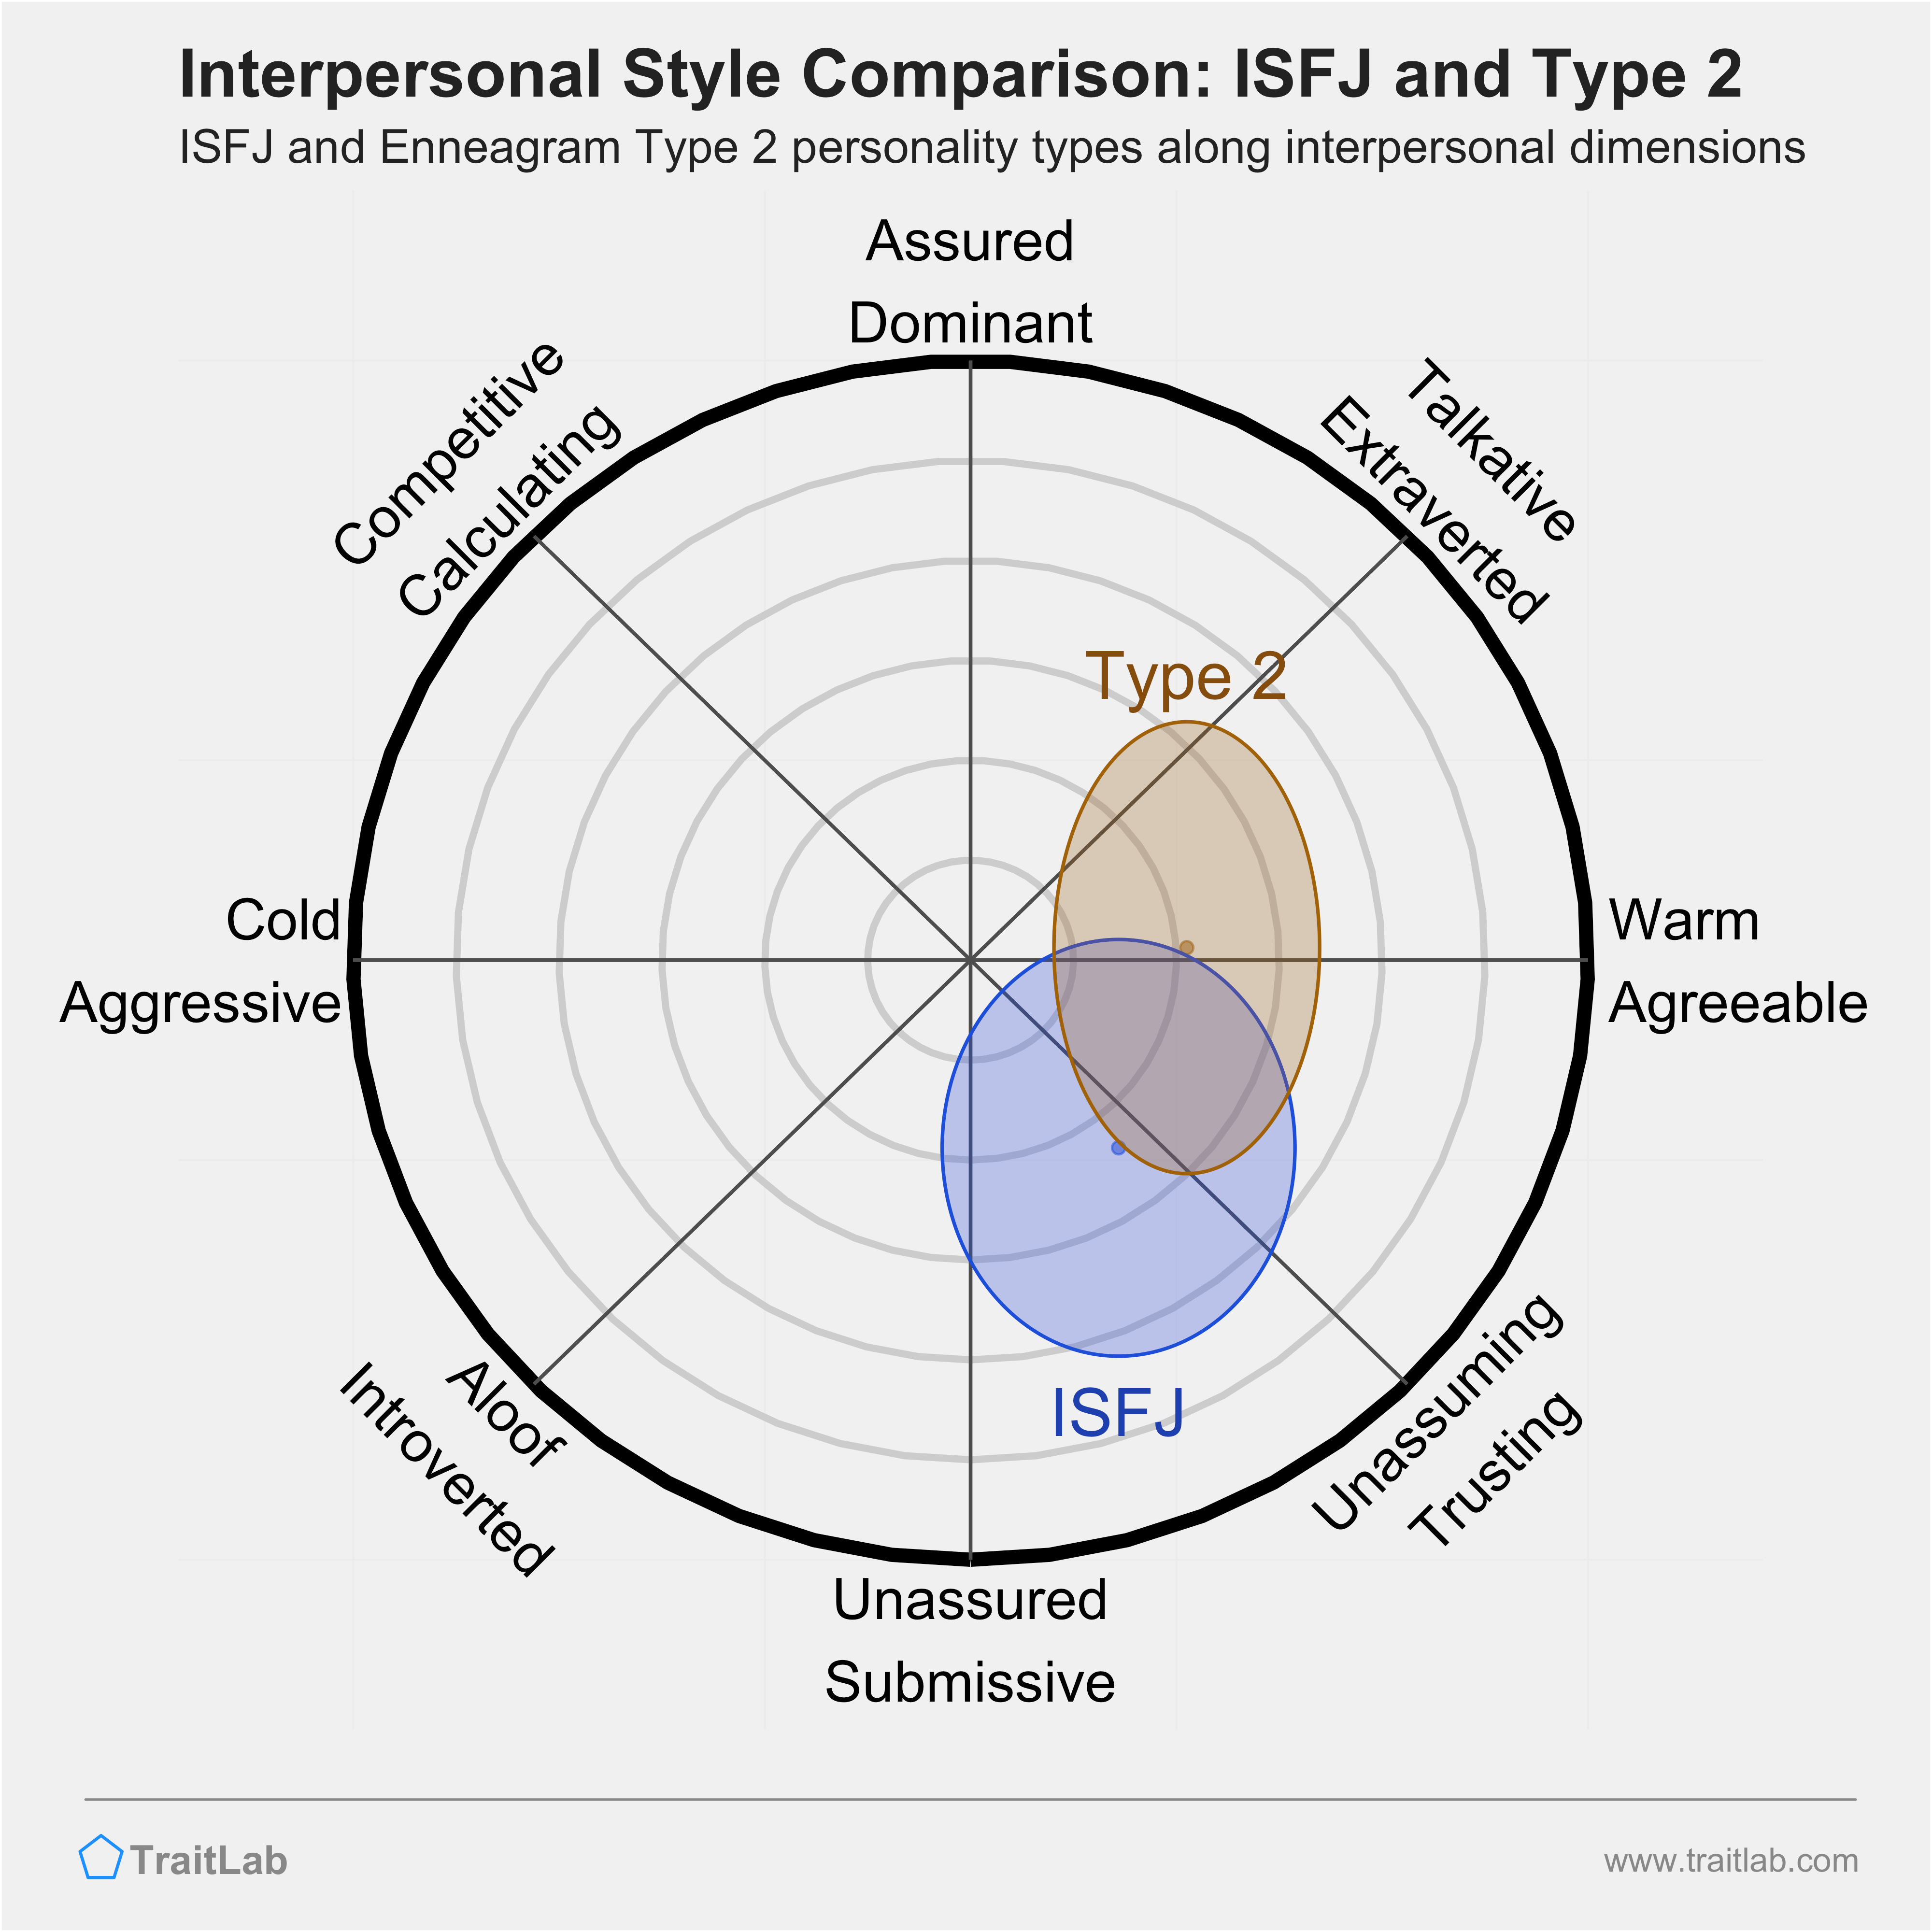 Enneagram ISFJ and Type 2 comparison across interpersonal dimensions